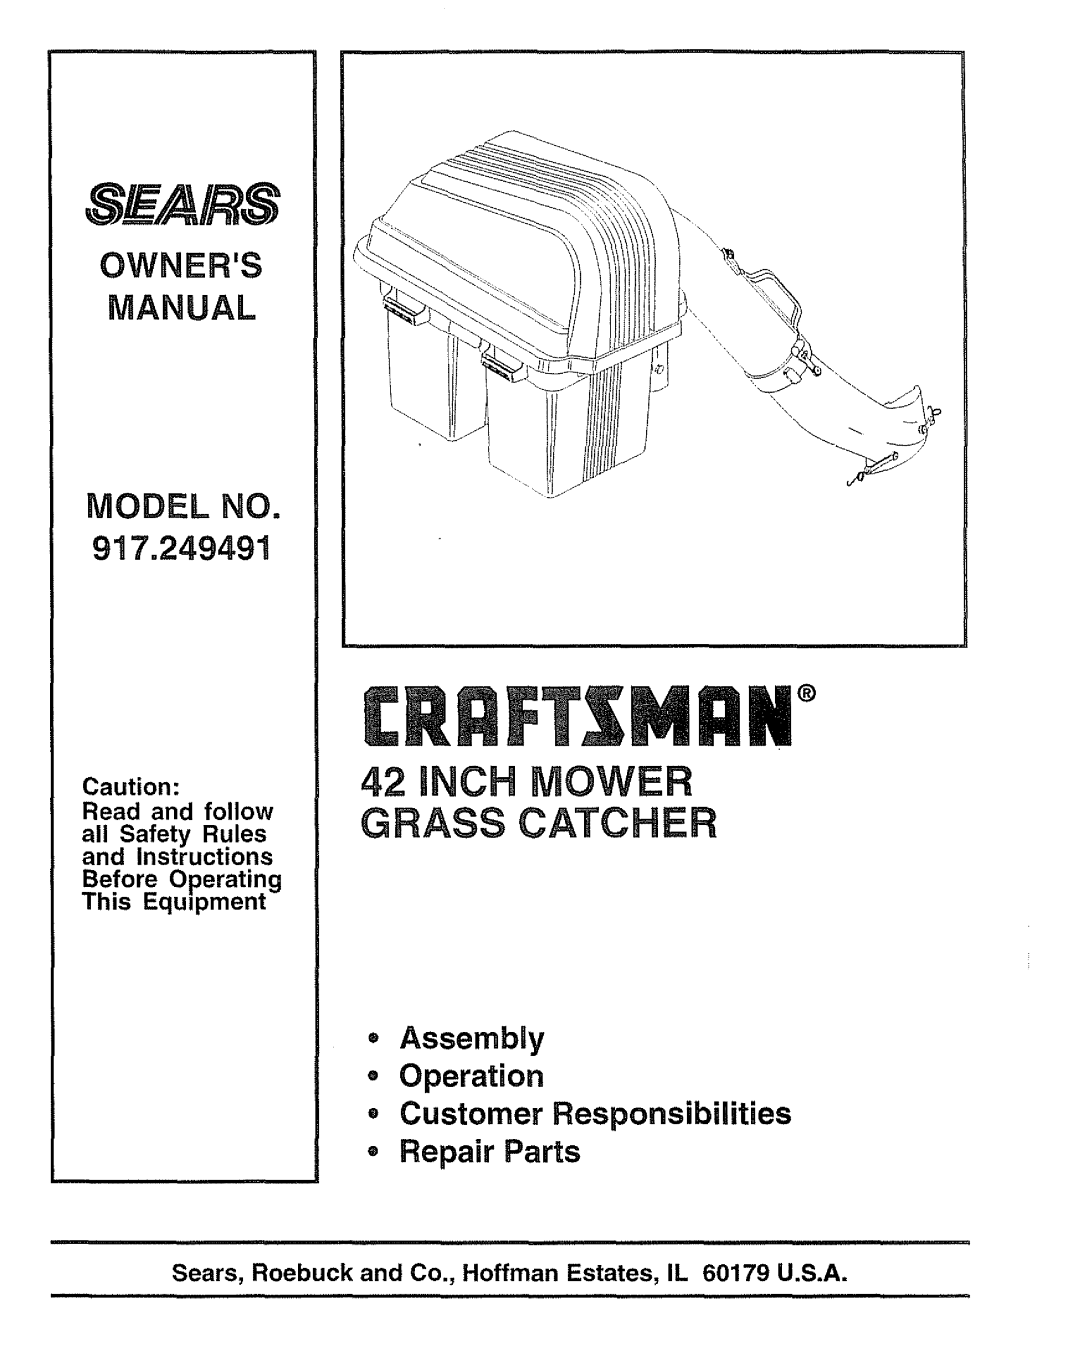 Sears 917.249491 owner manual Nch Mower, Grass Catcher, Read and follow all Safety Rules and Instructions, £nRFT MRll 